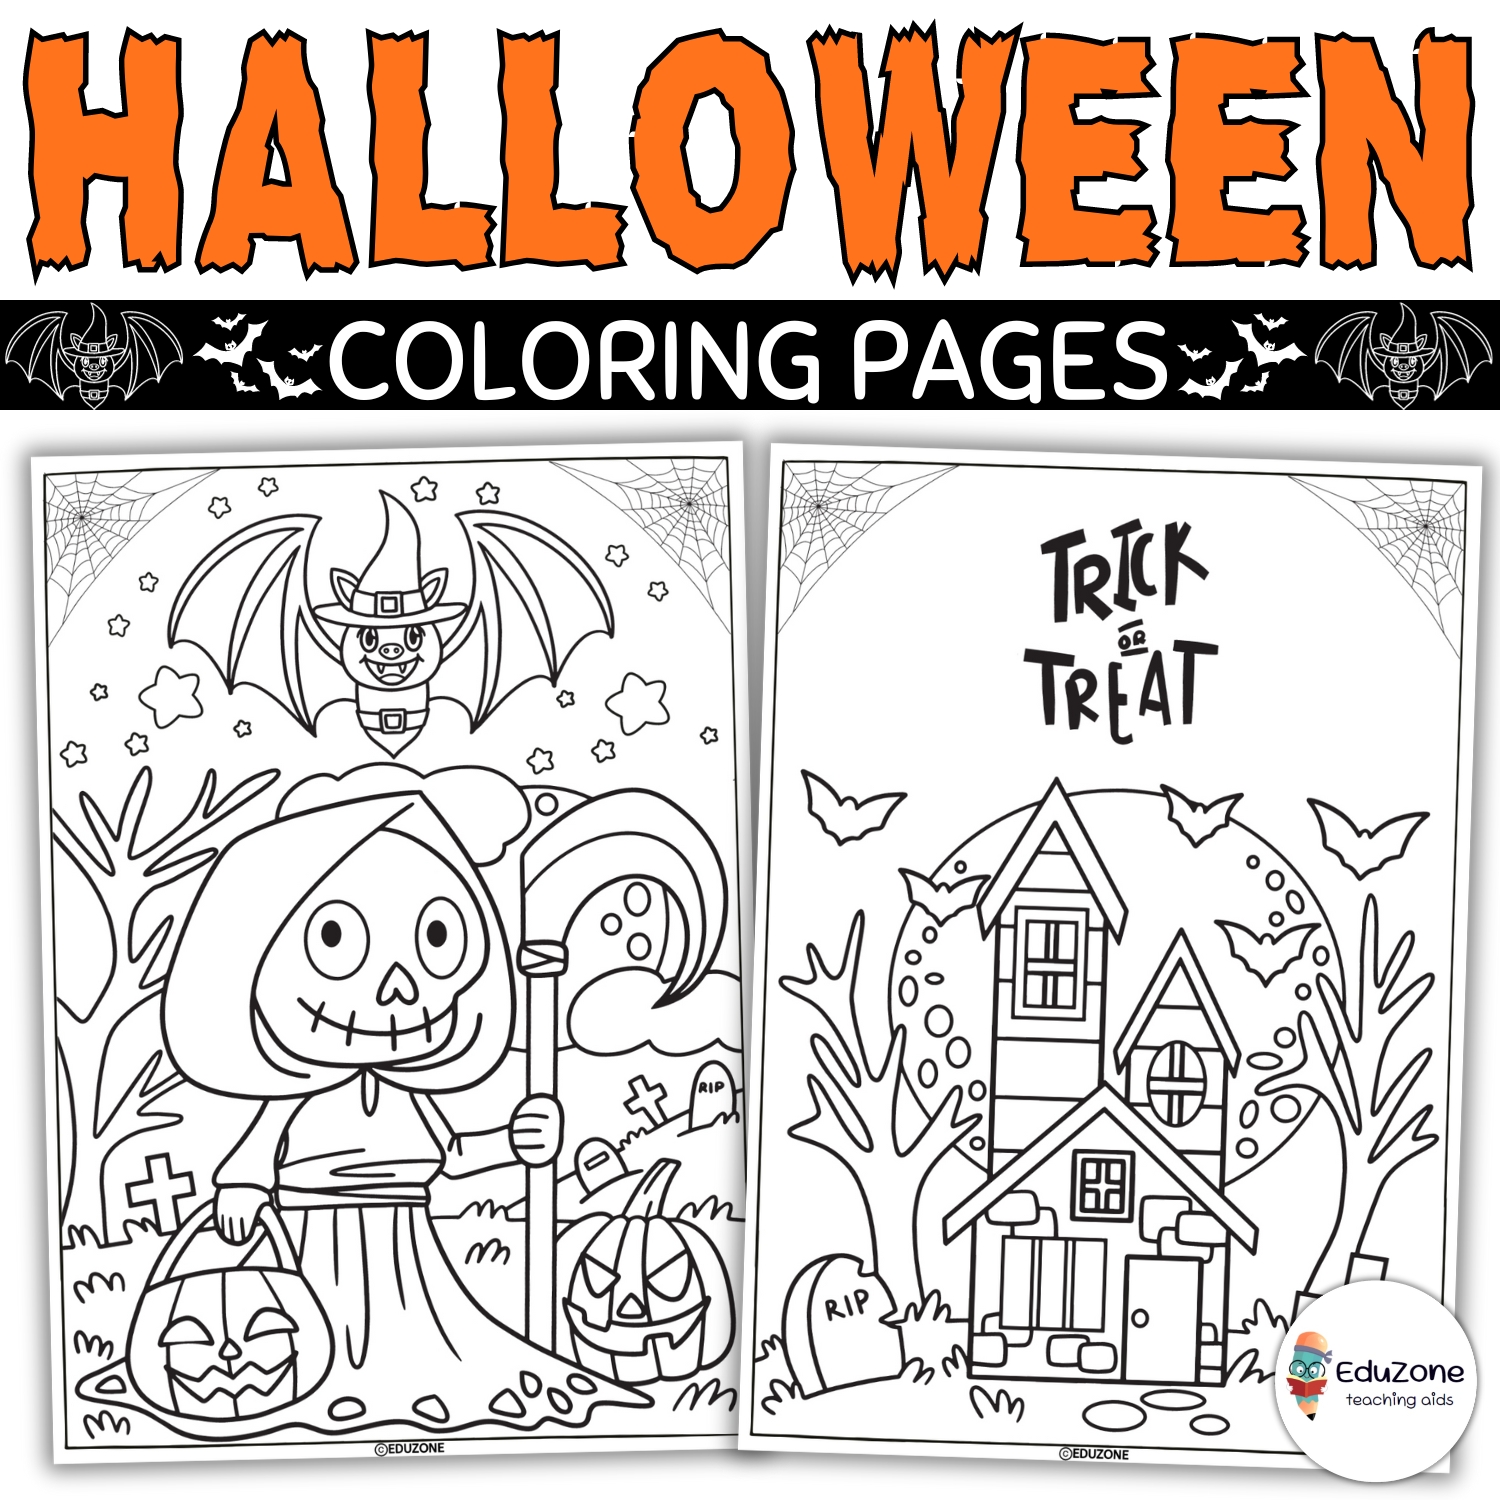 Spooktacular halloween coloring pages for all ages unleash your creativity made by teachers